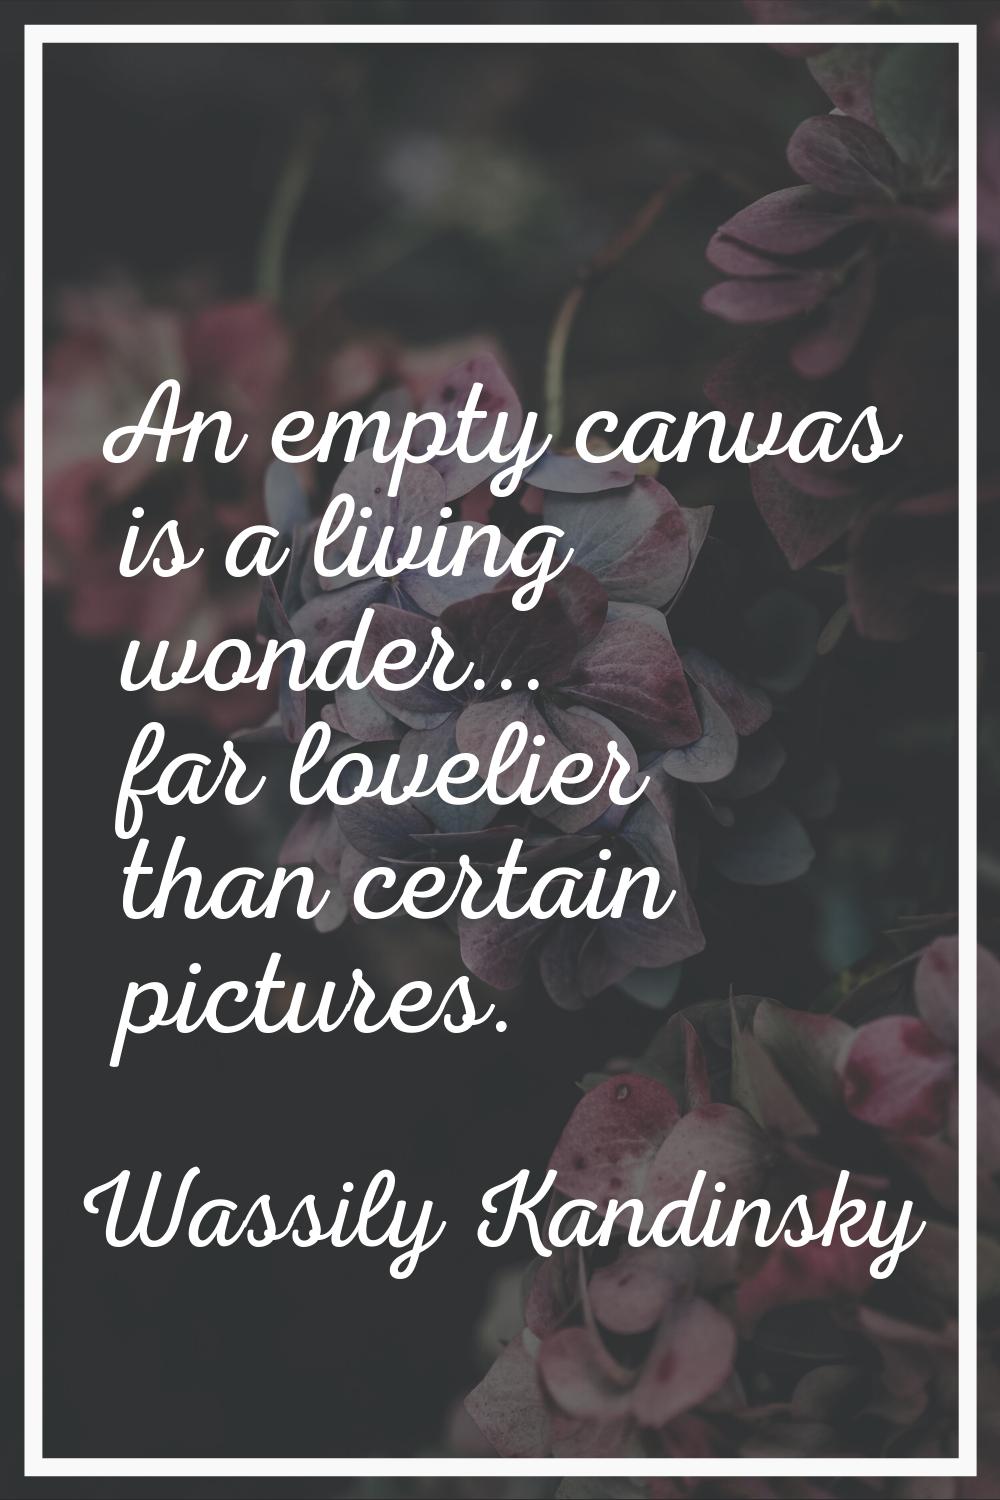 An empty canvas is a living wonder... far lovelier than certain pictures.